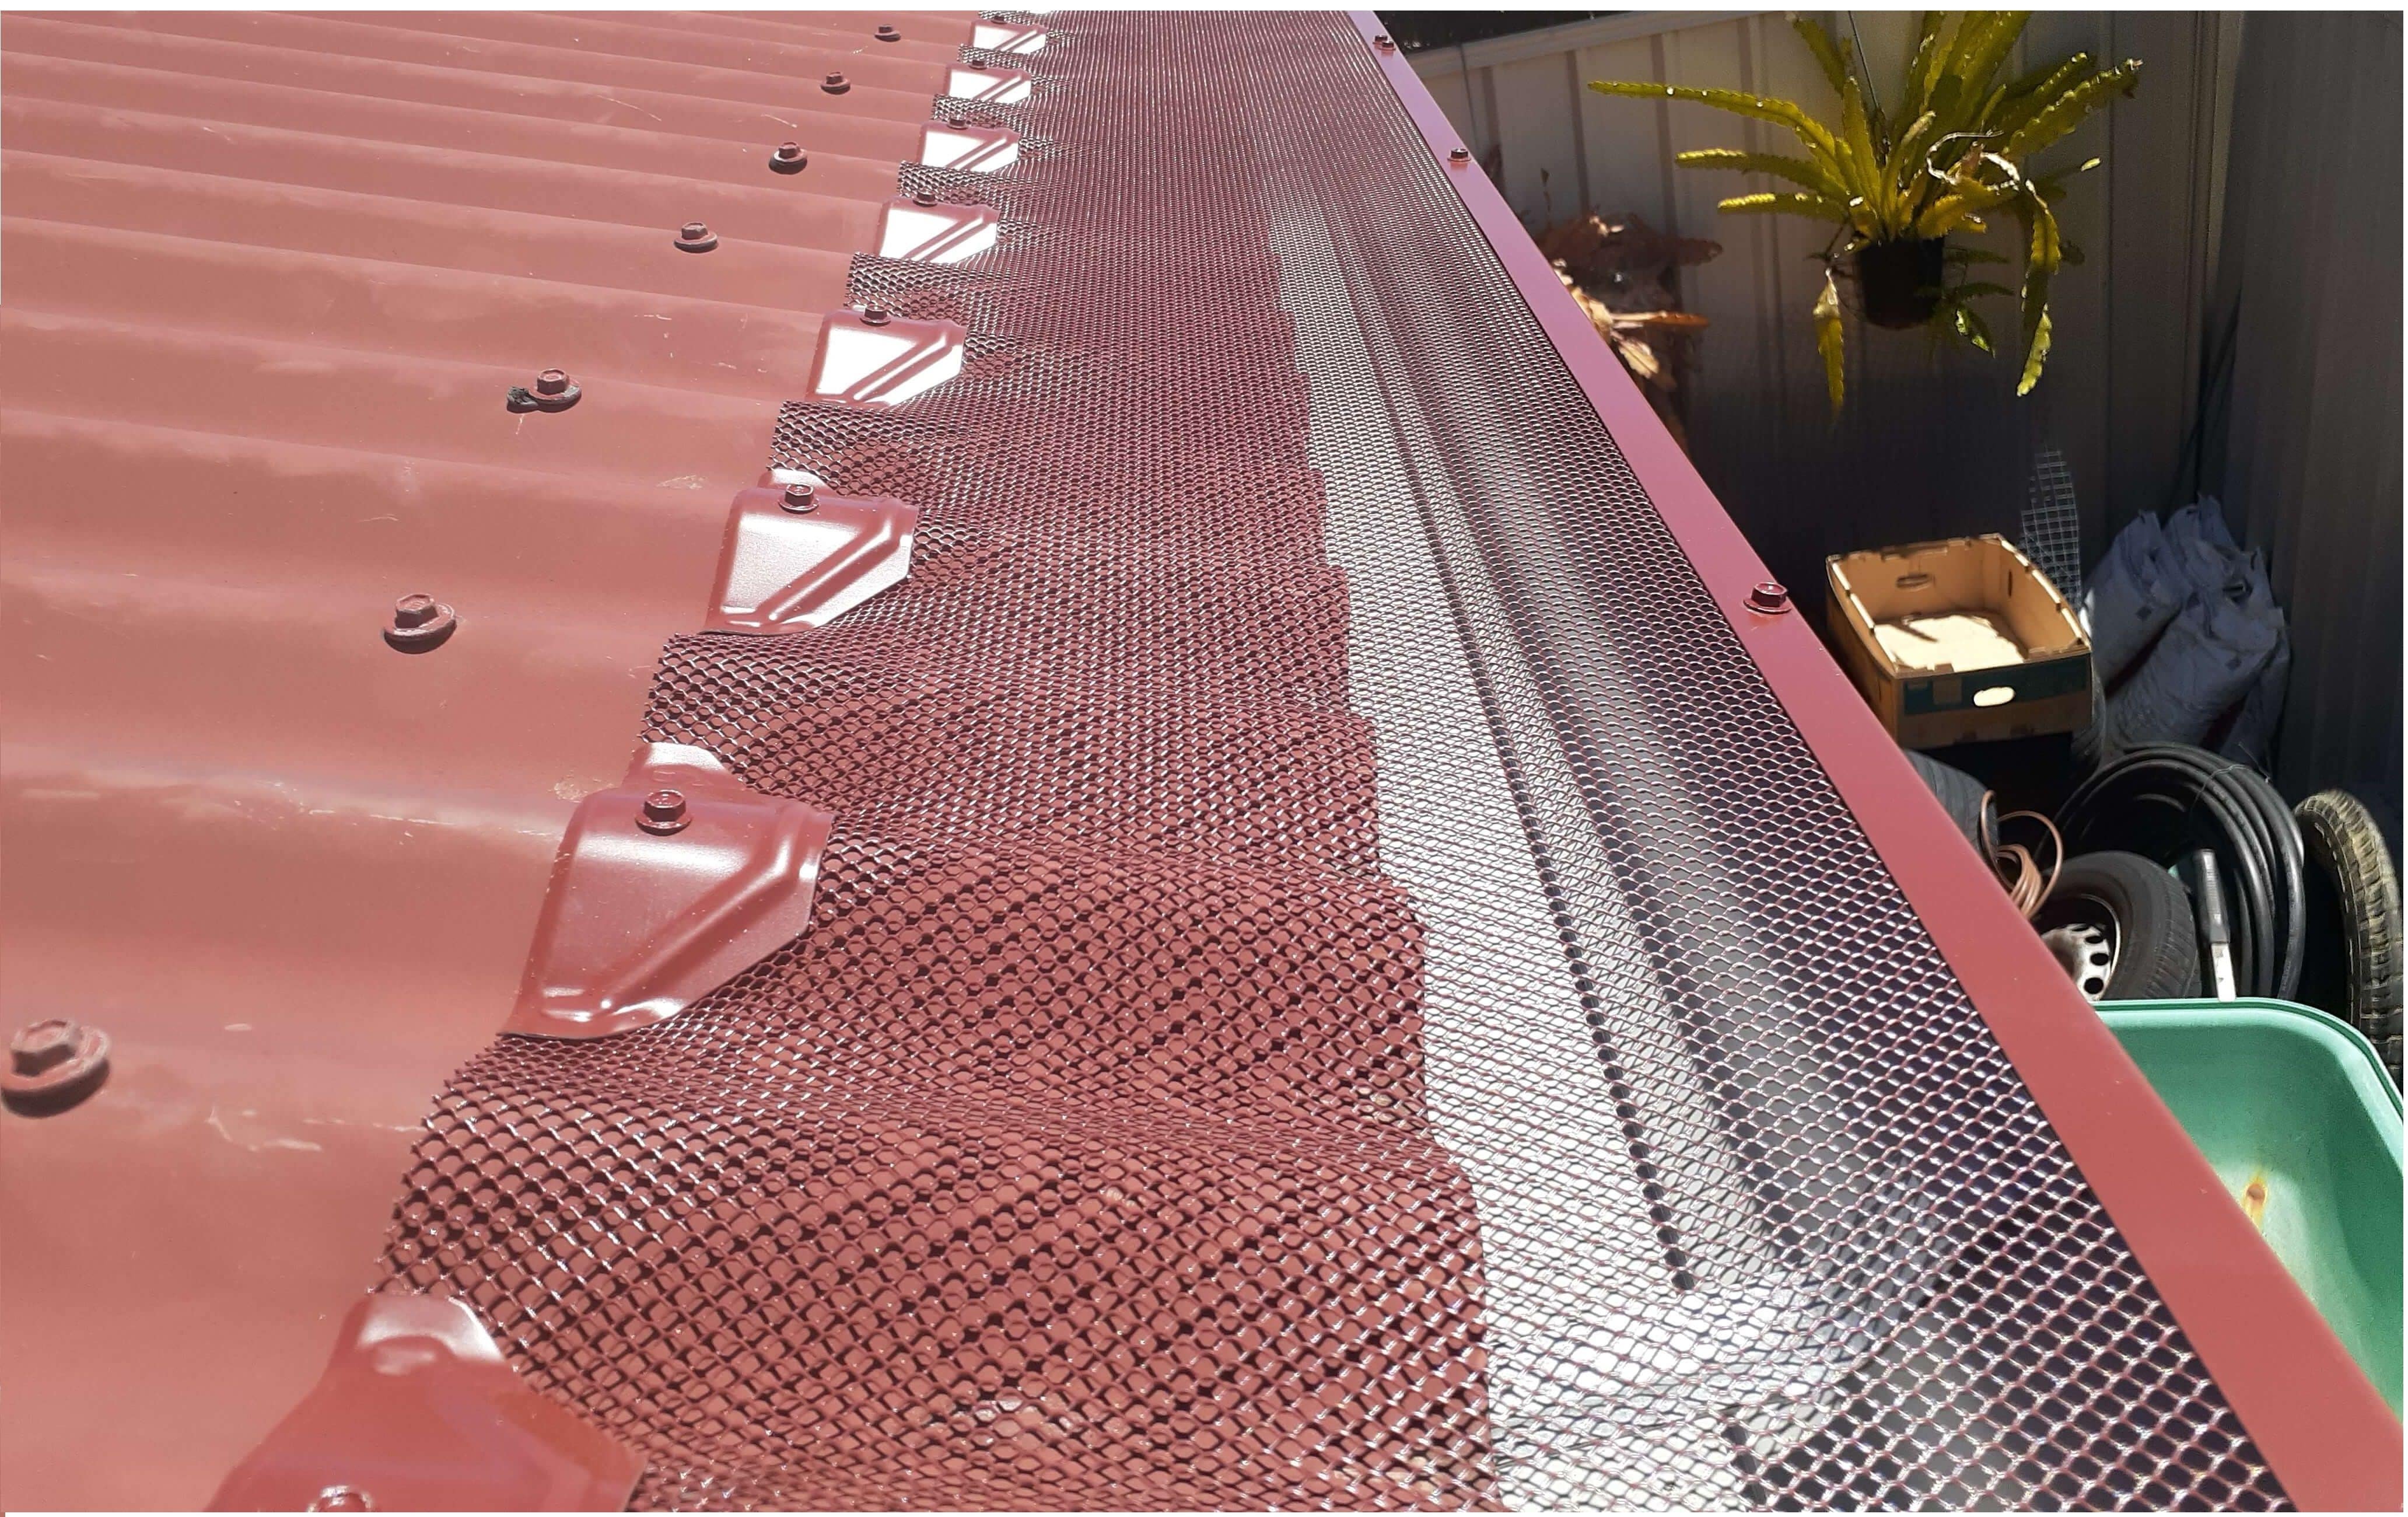 Aluminium Gutter Guards installed on a tin/Colorbond Roof in Perth